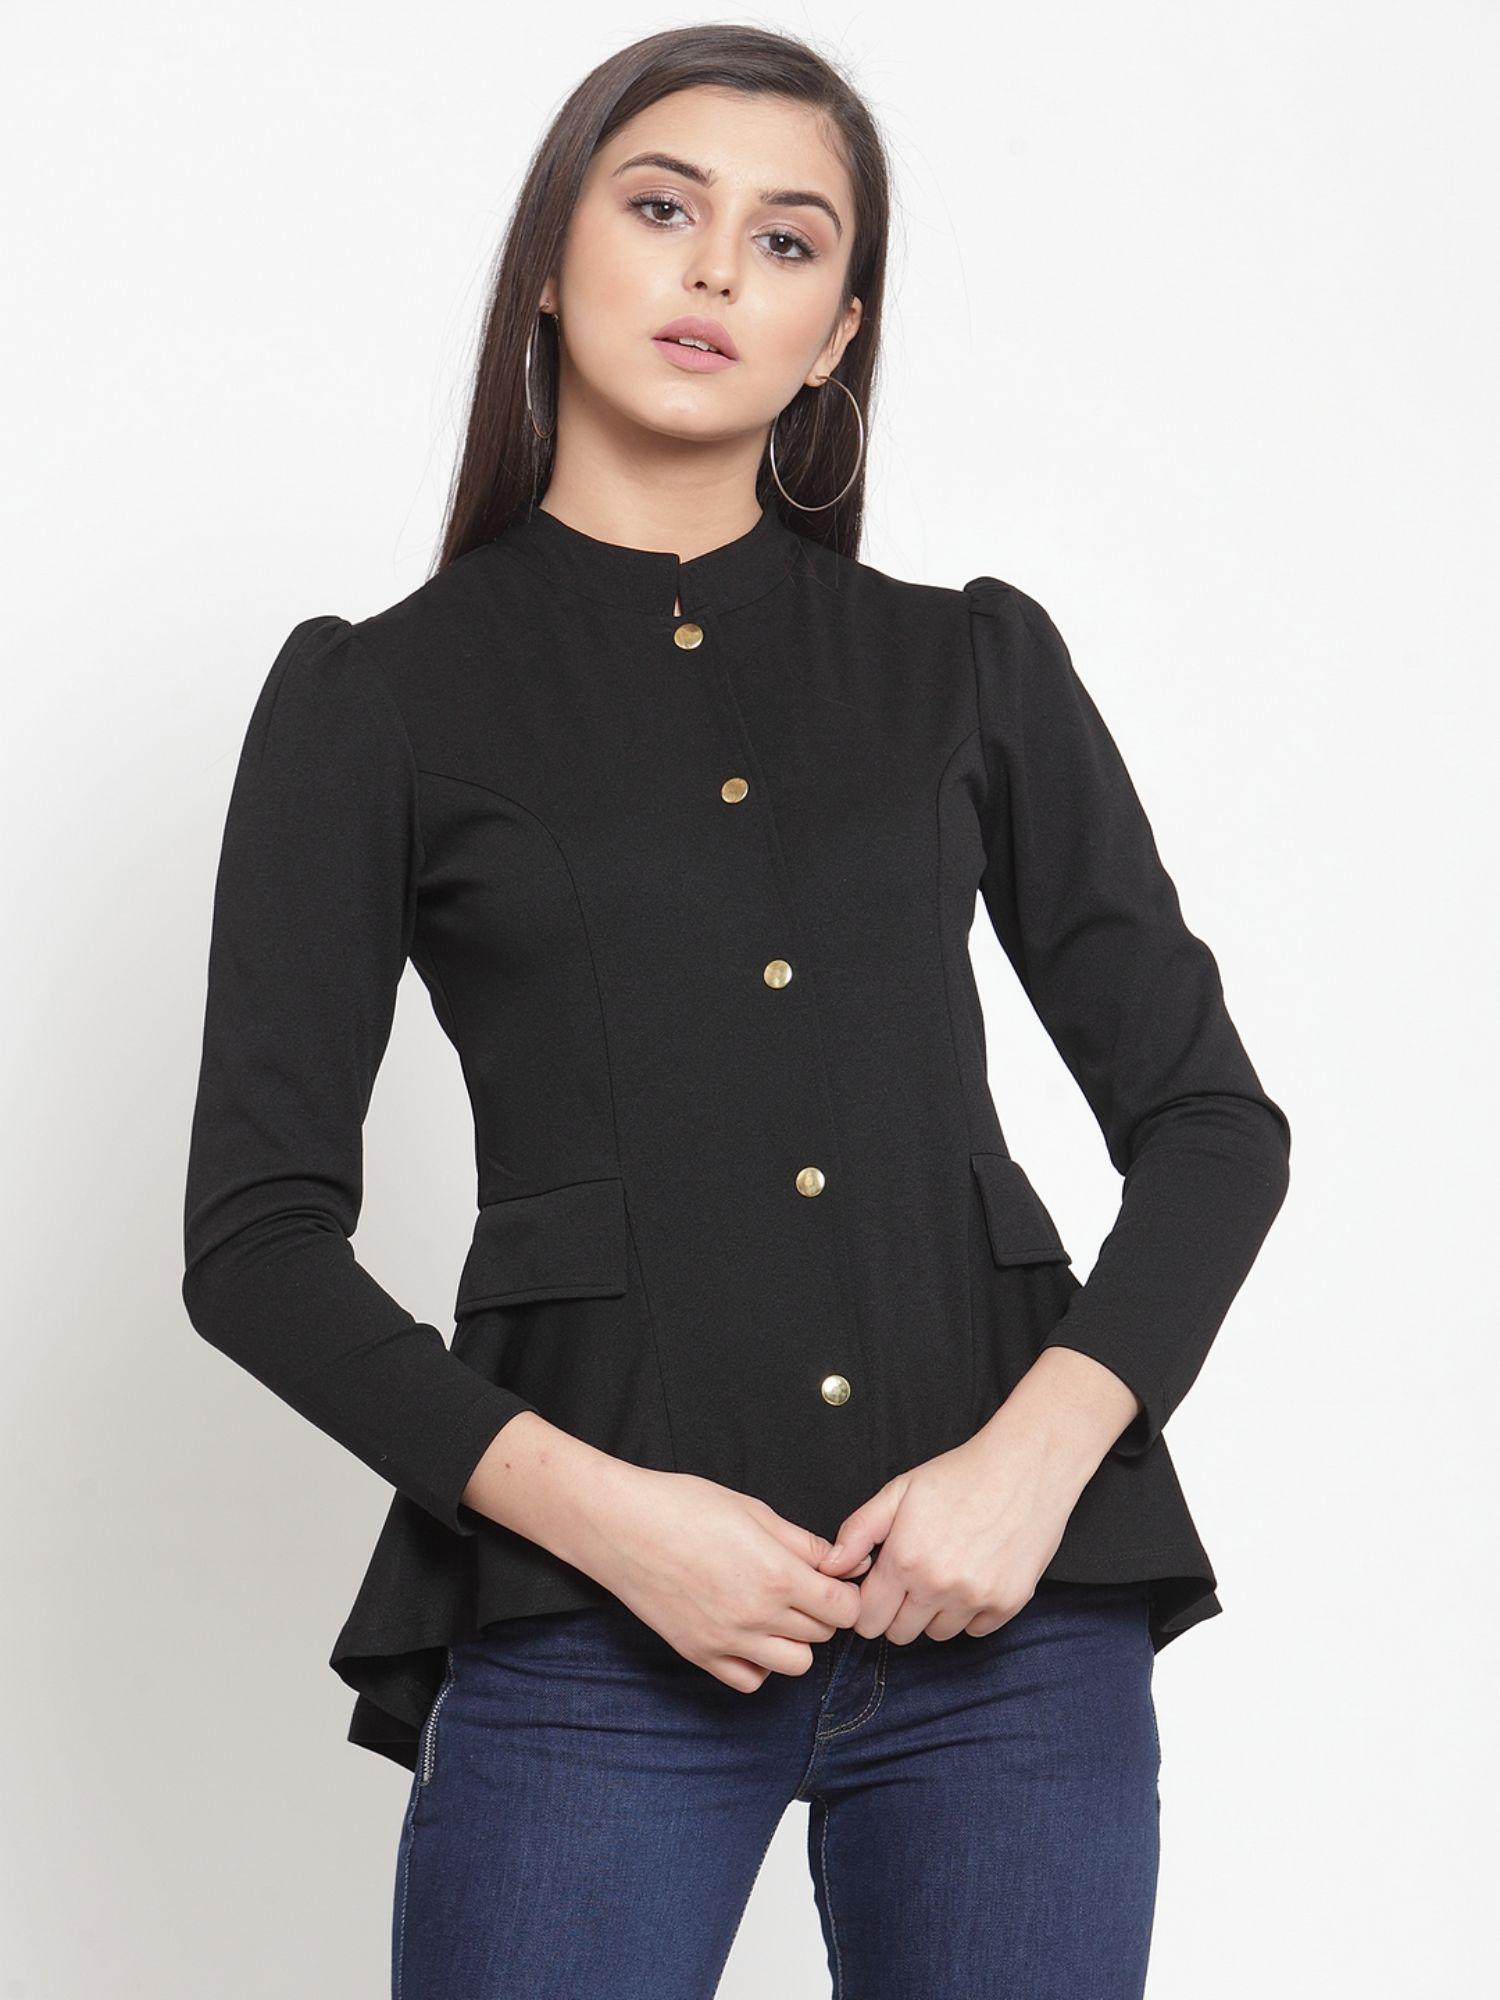 women-black-solid-tailored-jacket